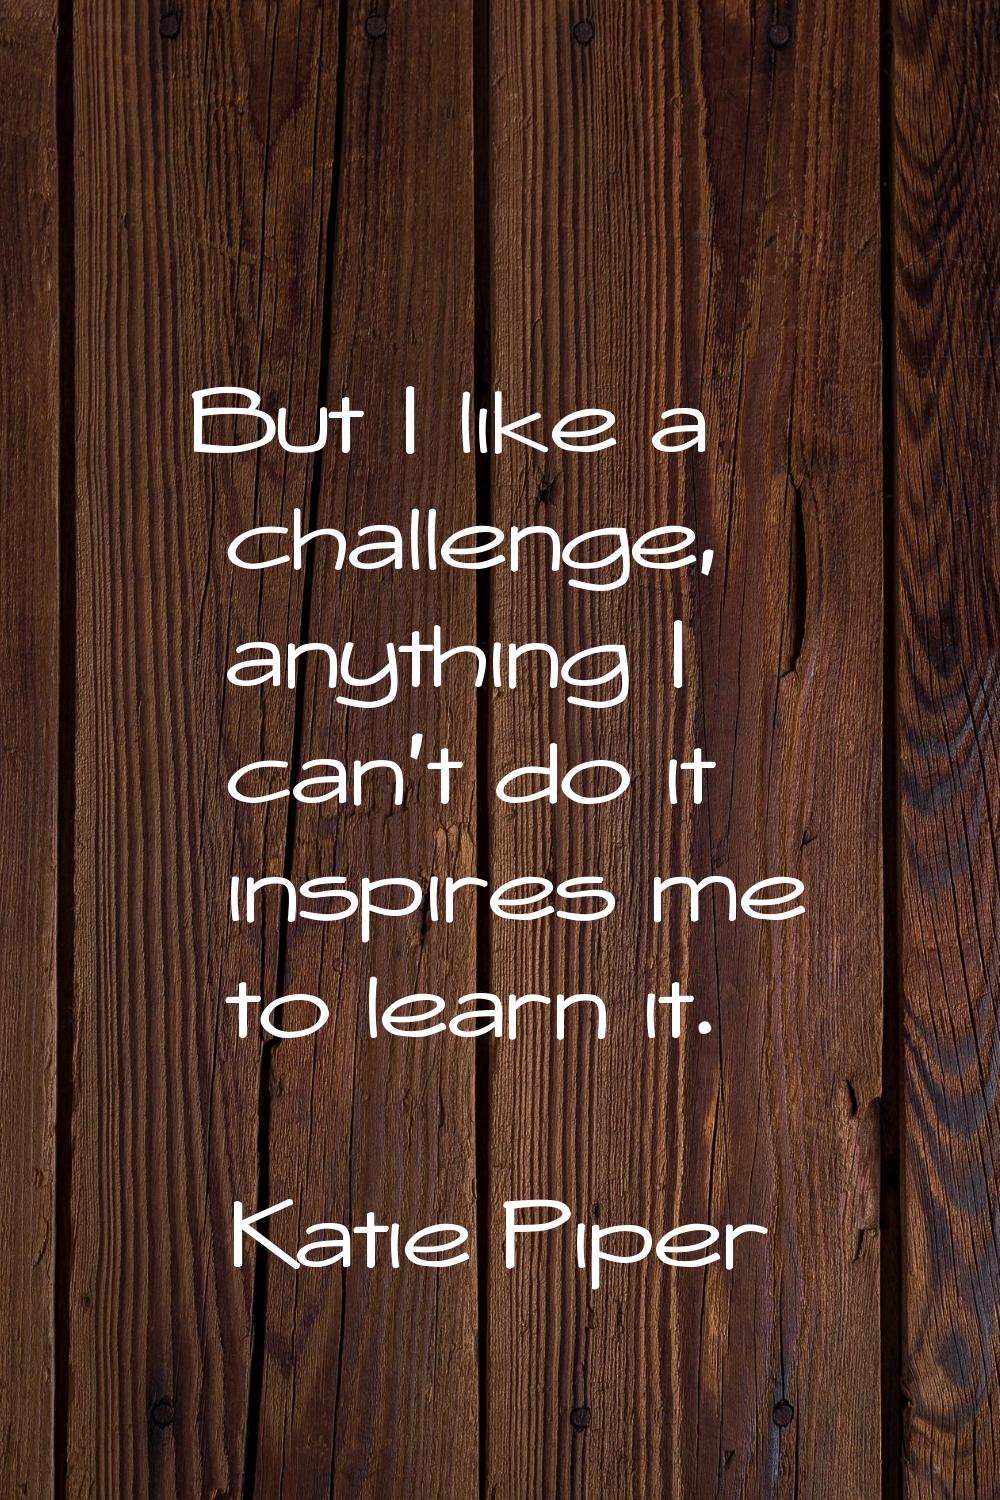 But I like a challenge, anything I can’t do it inspires me to learn it.